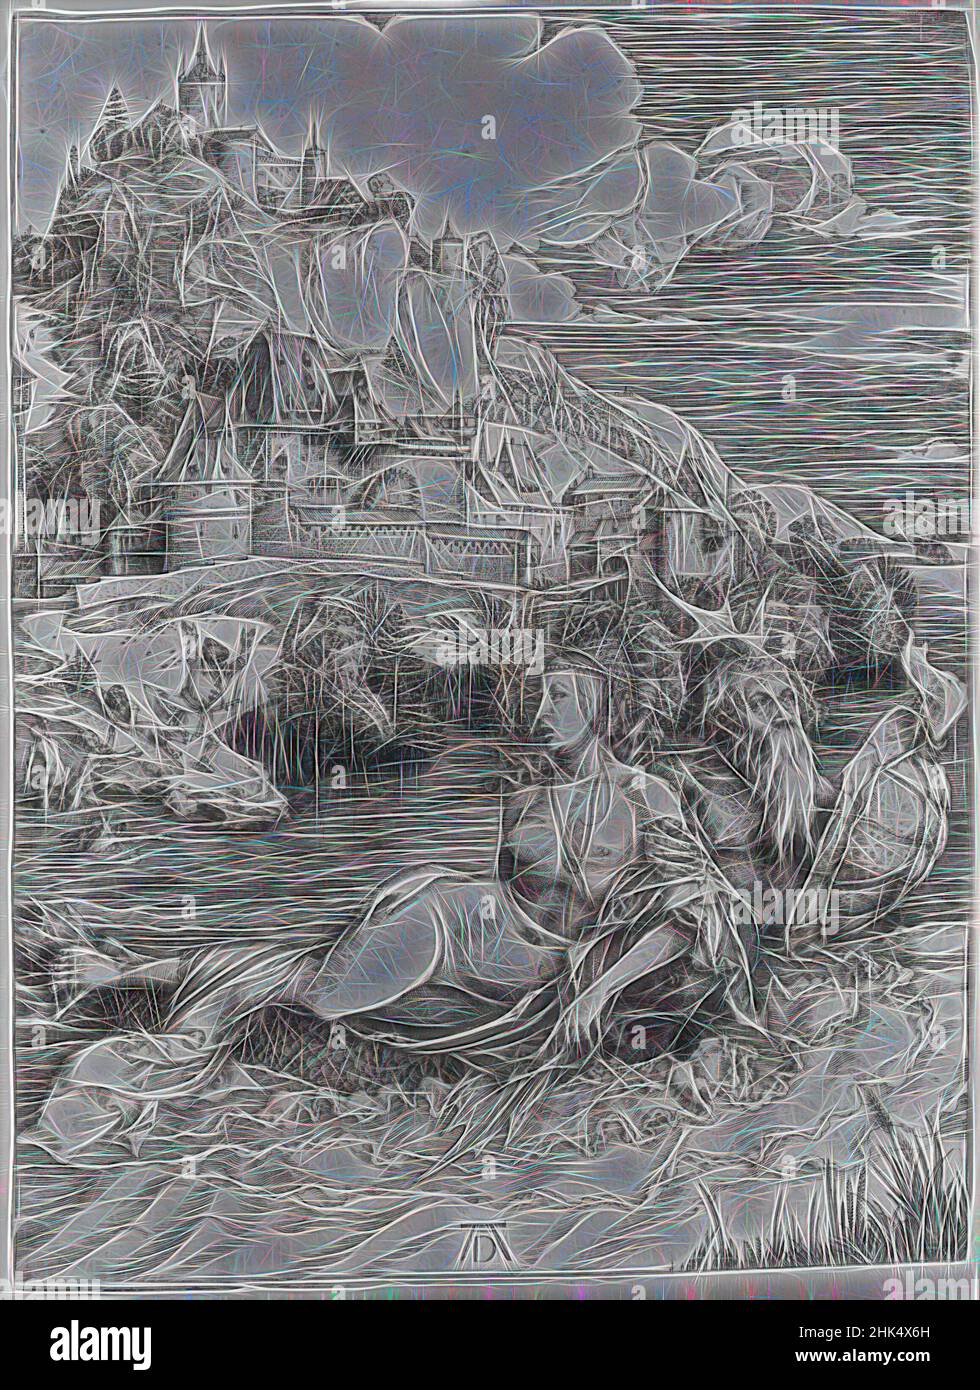 Inspired by The Sea Monster, Albrecht Dürer, German, 1471-1528, Engraving on laid paper, Germany, 1500, 9 7/8 x 7 3/8 in., 25.1 x 18.7 cm, Reimagined by Artotop. Classic art reinvented with a modern twist. Design of warm cheerful glowing of brightness and light ray radiance. Photography inspired by surrealism and futurism, embracing dynamic energy of modern technology, movement, speed and revolutionize culture Stock Photo